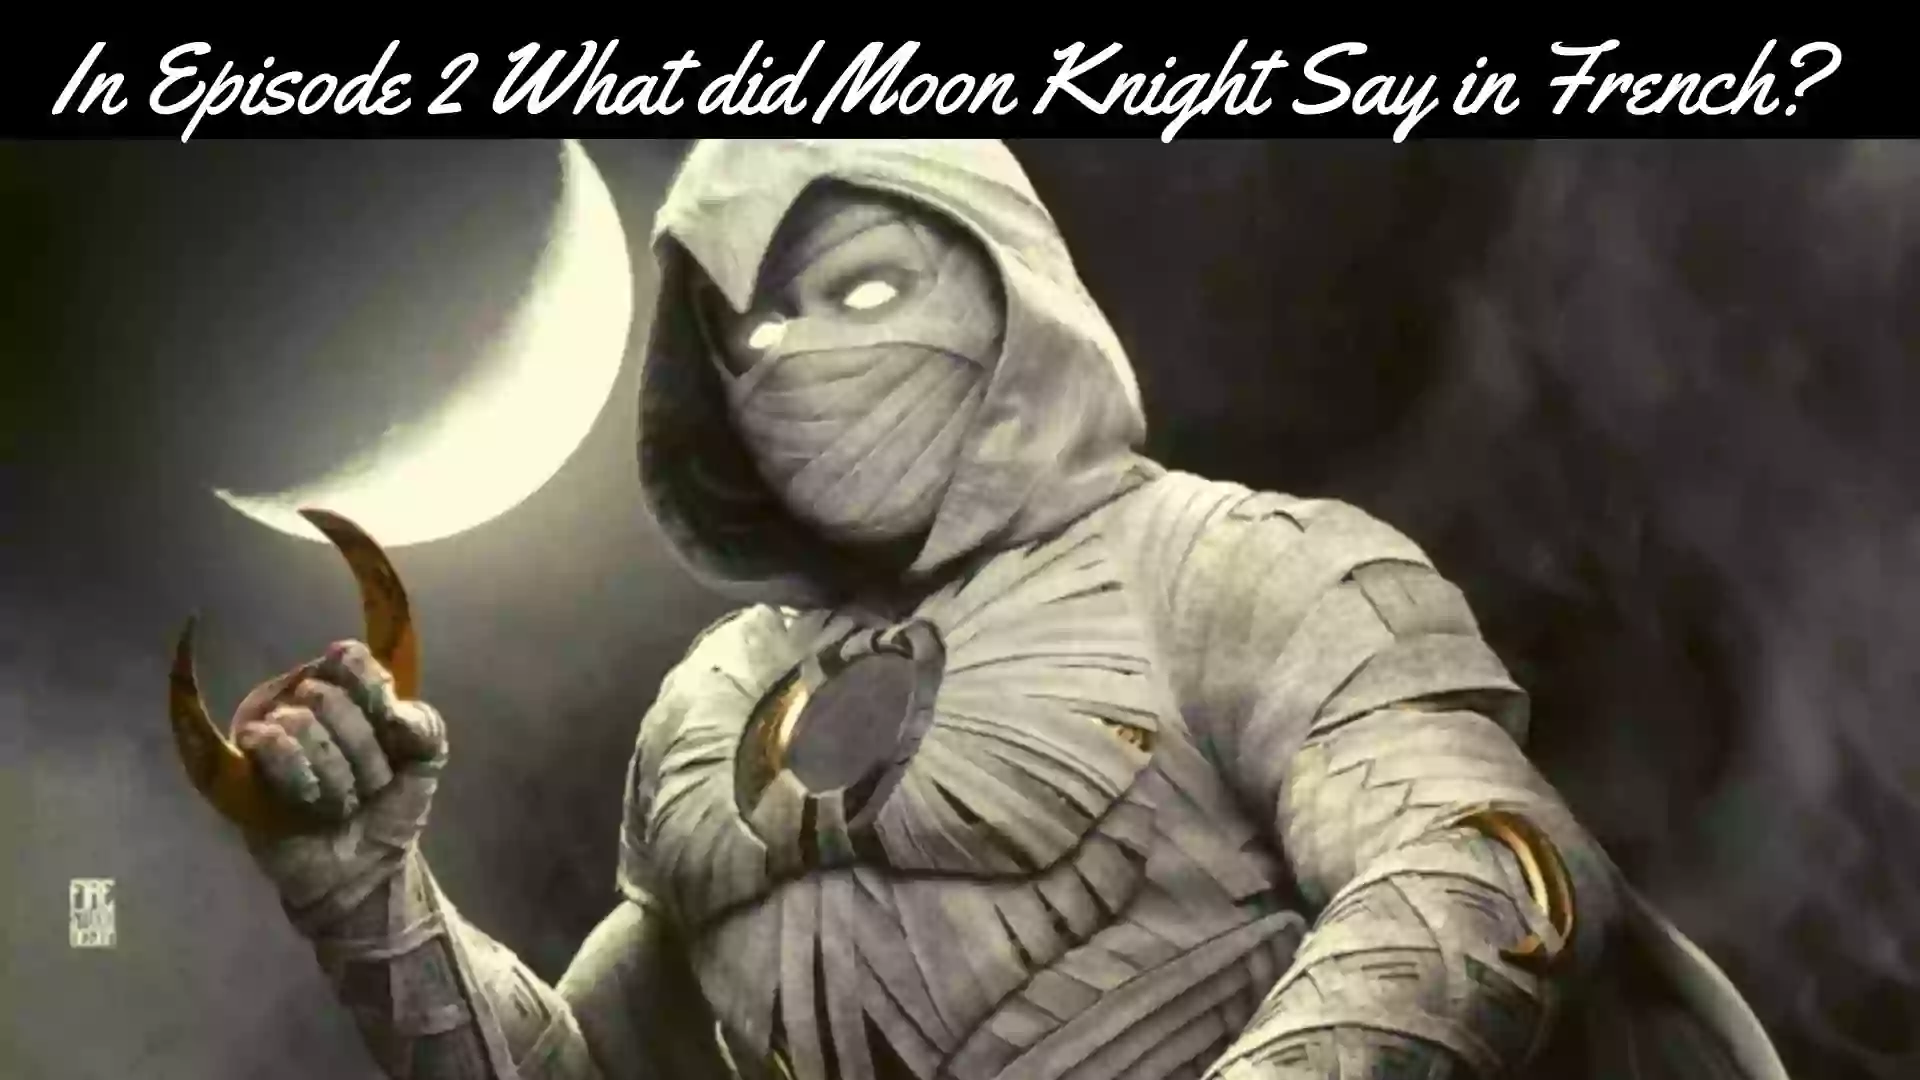 In Episode 2 What did Moon Knight Say in French?